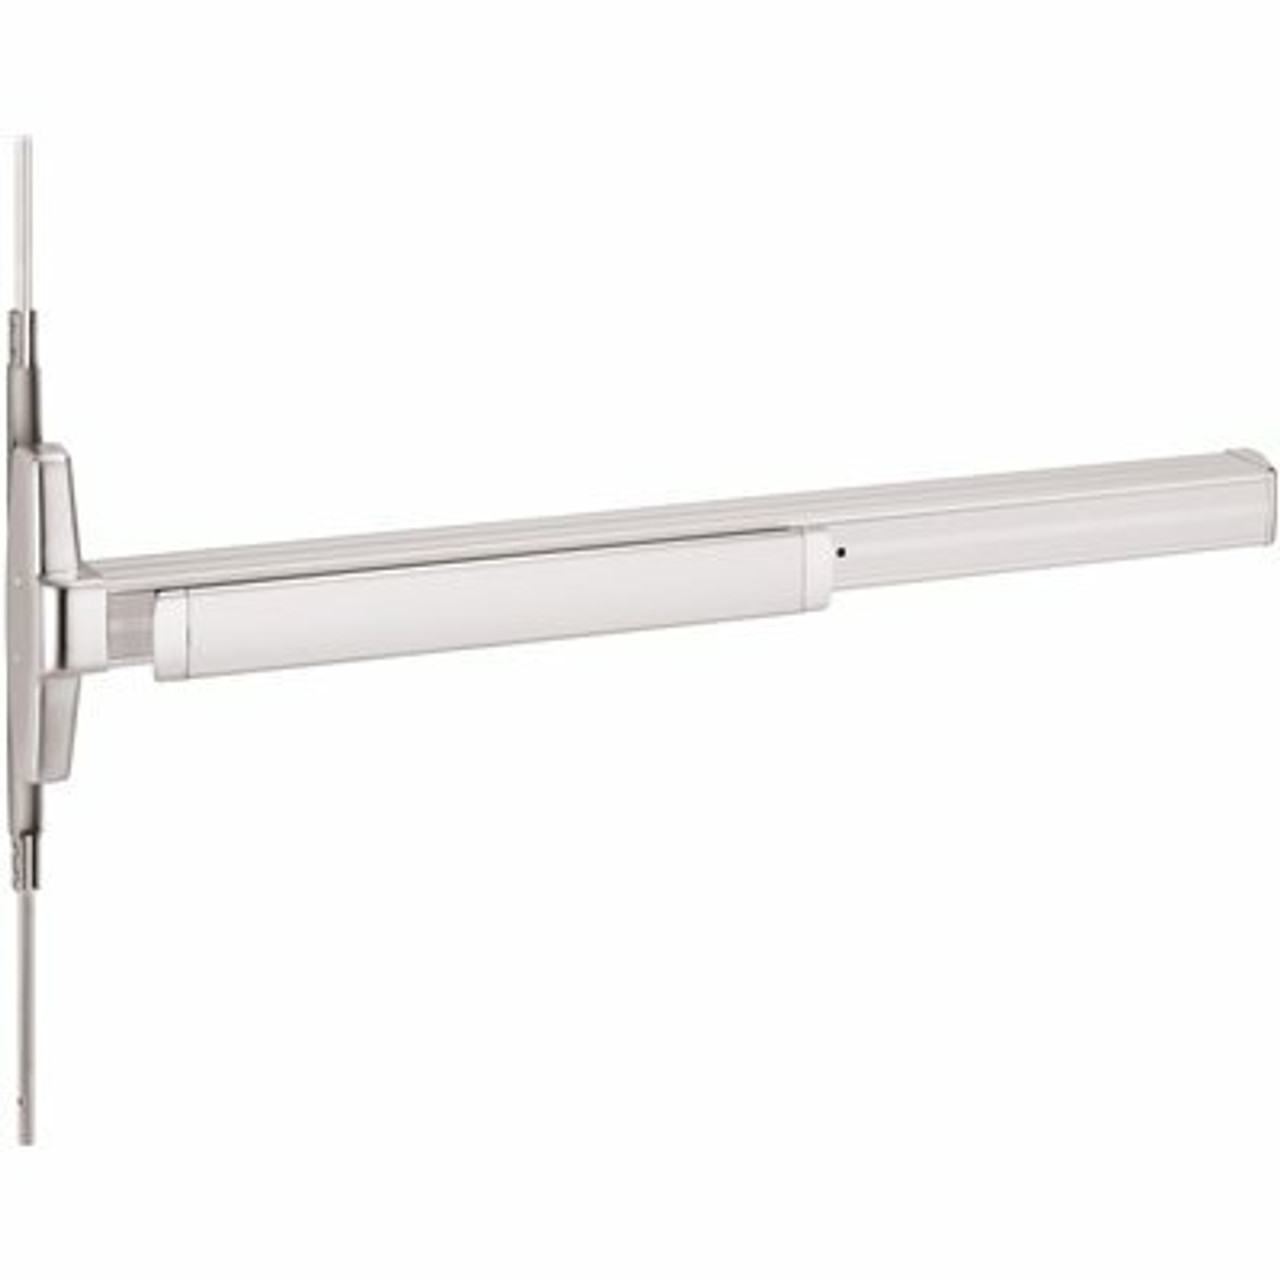 Von Duprin Grade-1 Aluminum Concealed Vertical Rod Exit Device, Non-Handed, Exit Only - 310013218